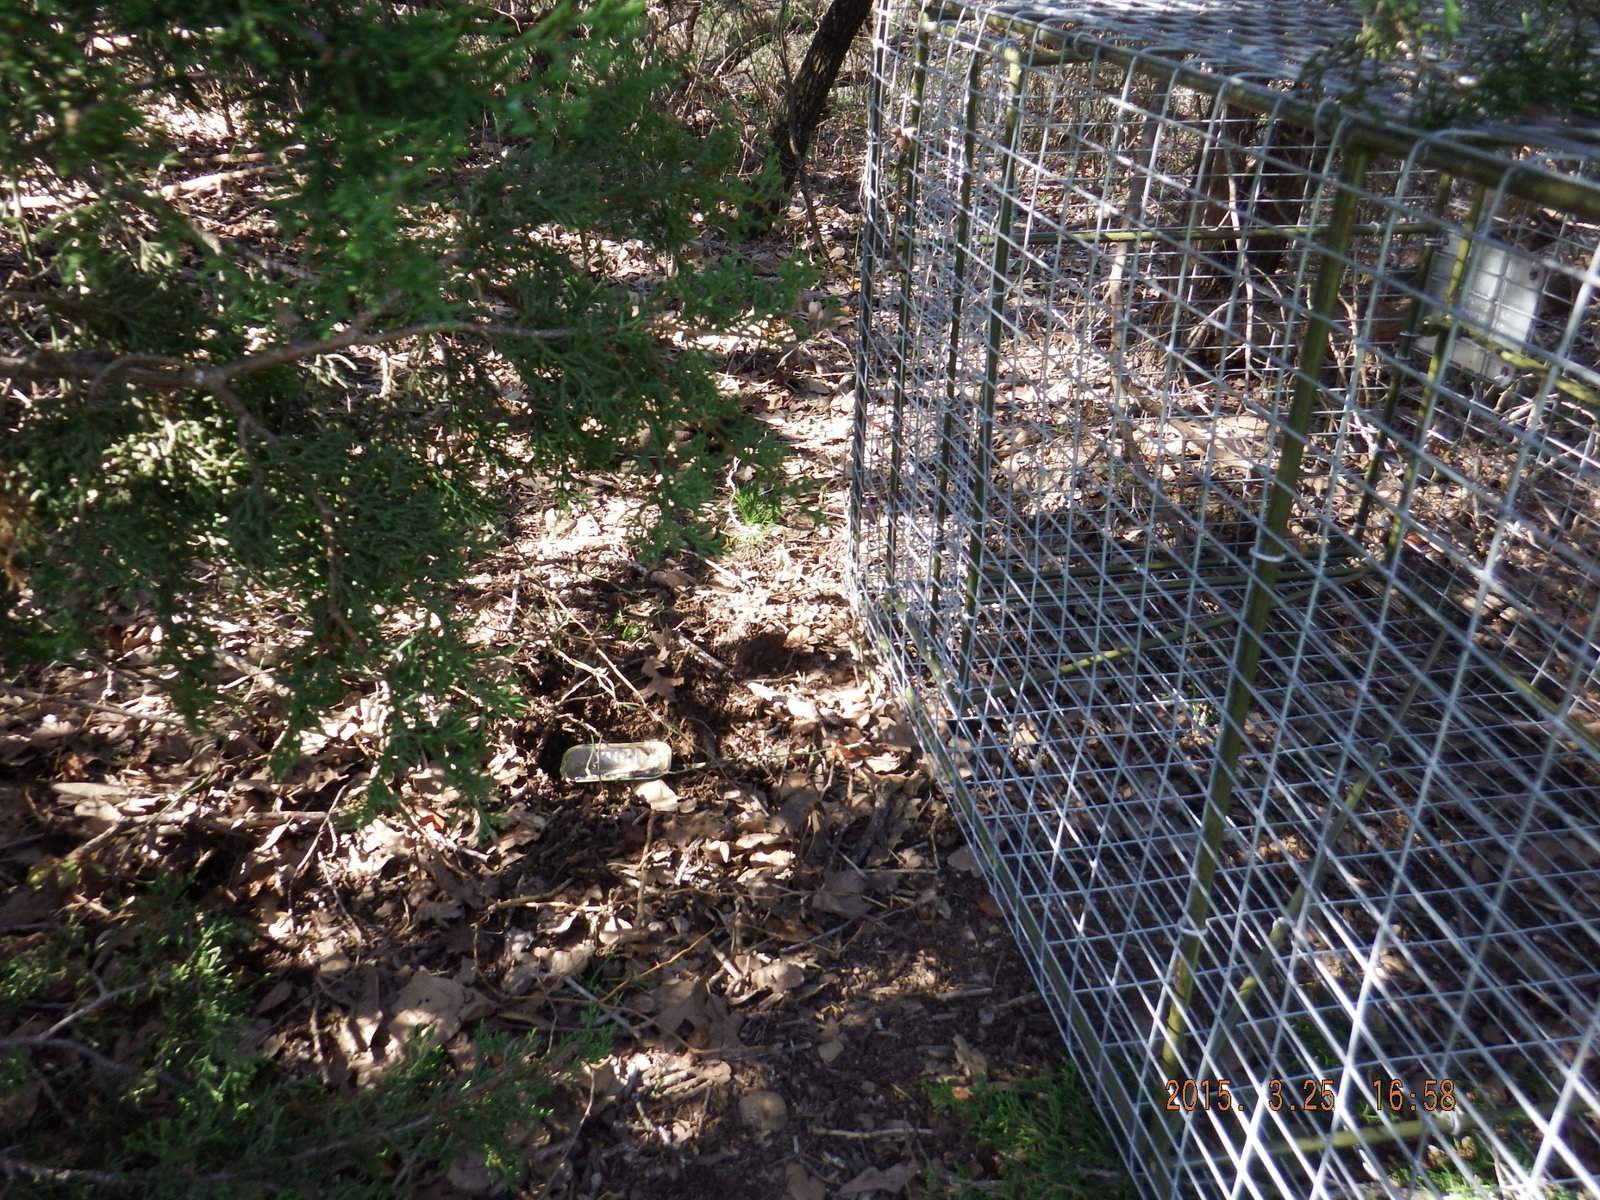 Cattle Predator Trap and Bear Knife at work setting sardine bait in the ground with trap.JPG